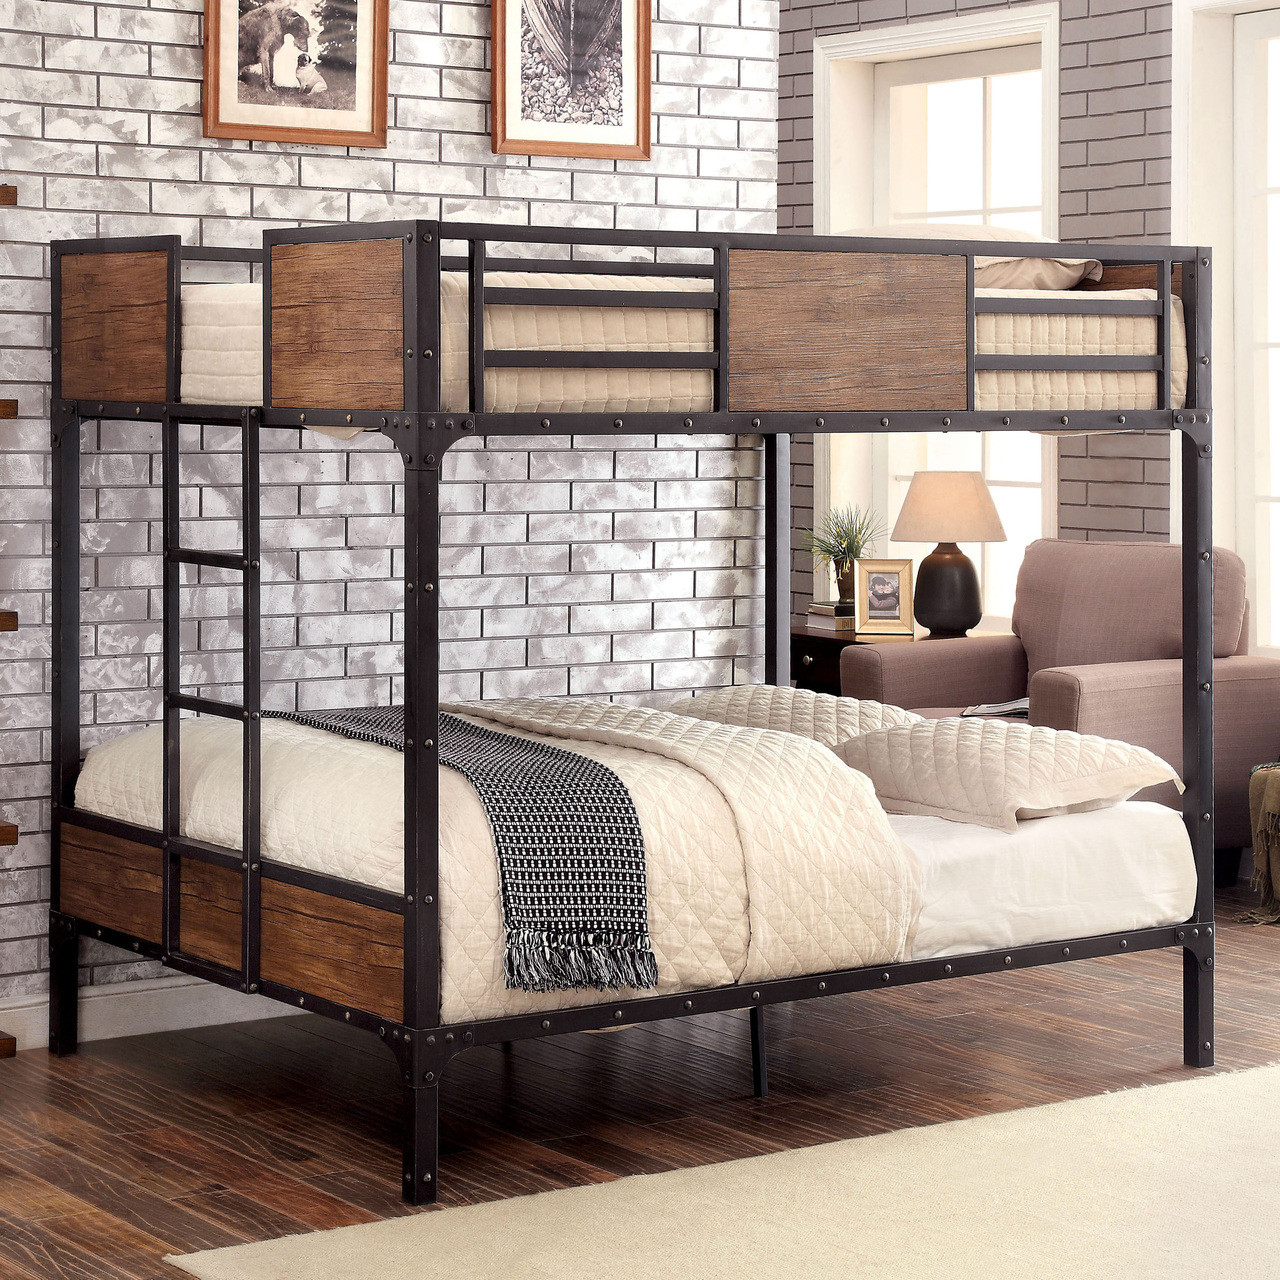 full size wooden bunk beds